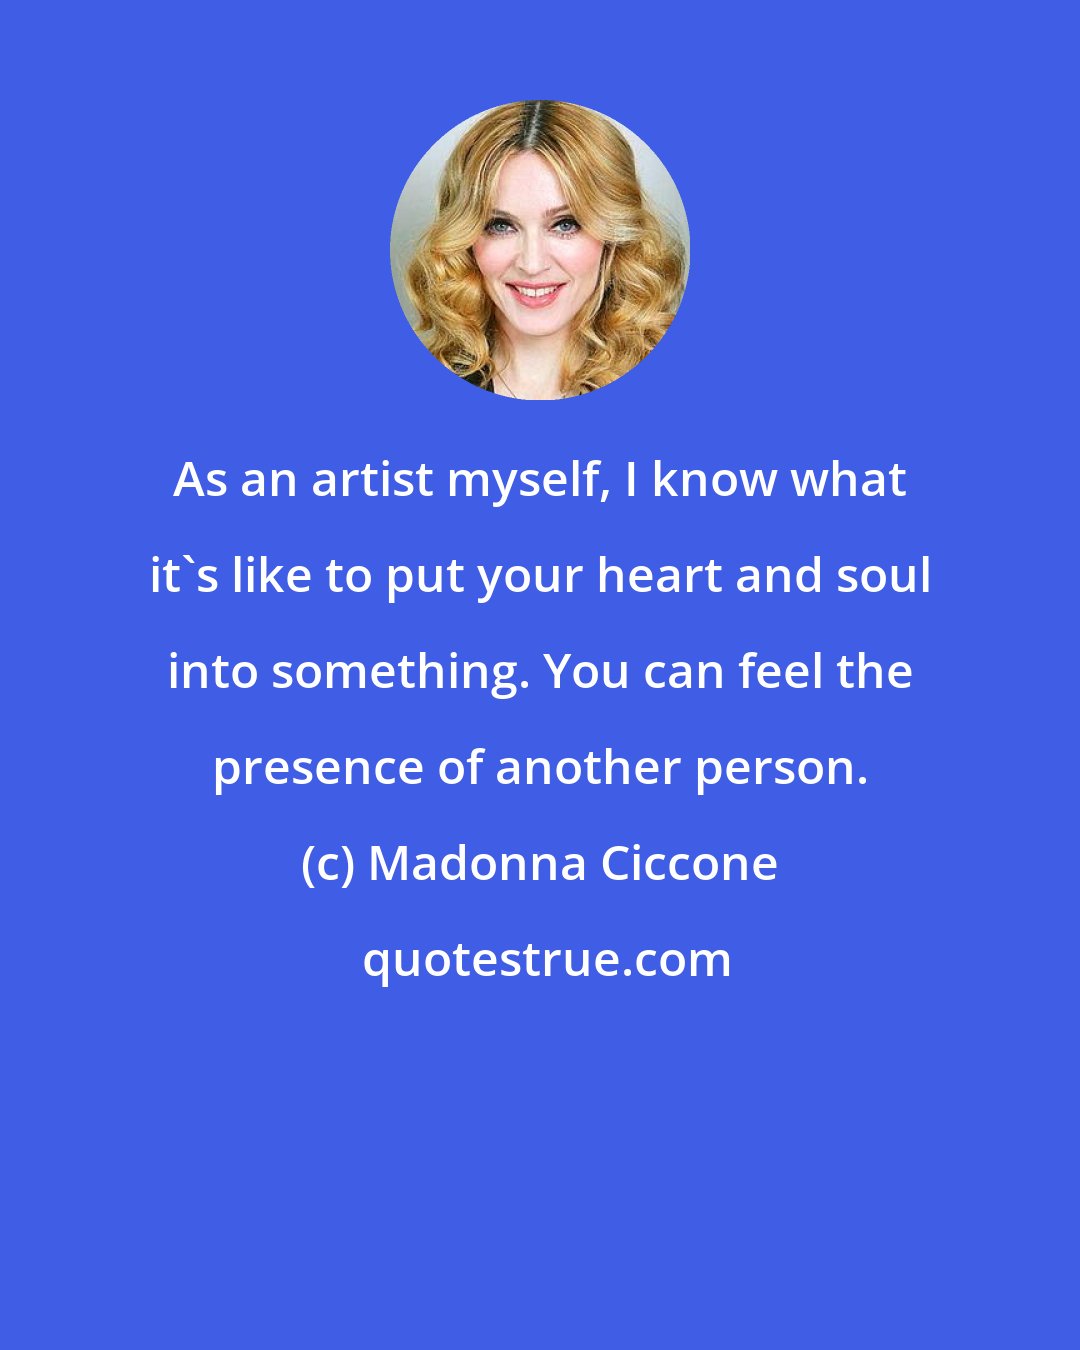 Madonna Ciccone: As an artist myself, I know what it's like to put your heart and soul into something. You can feel the presence of another person.